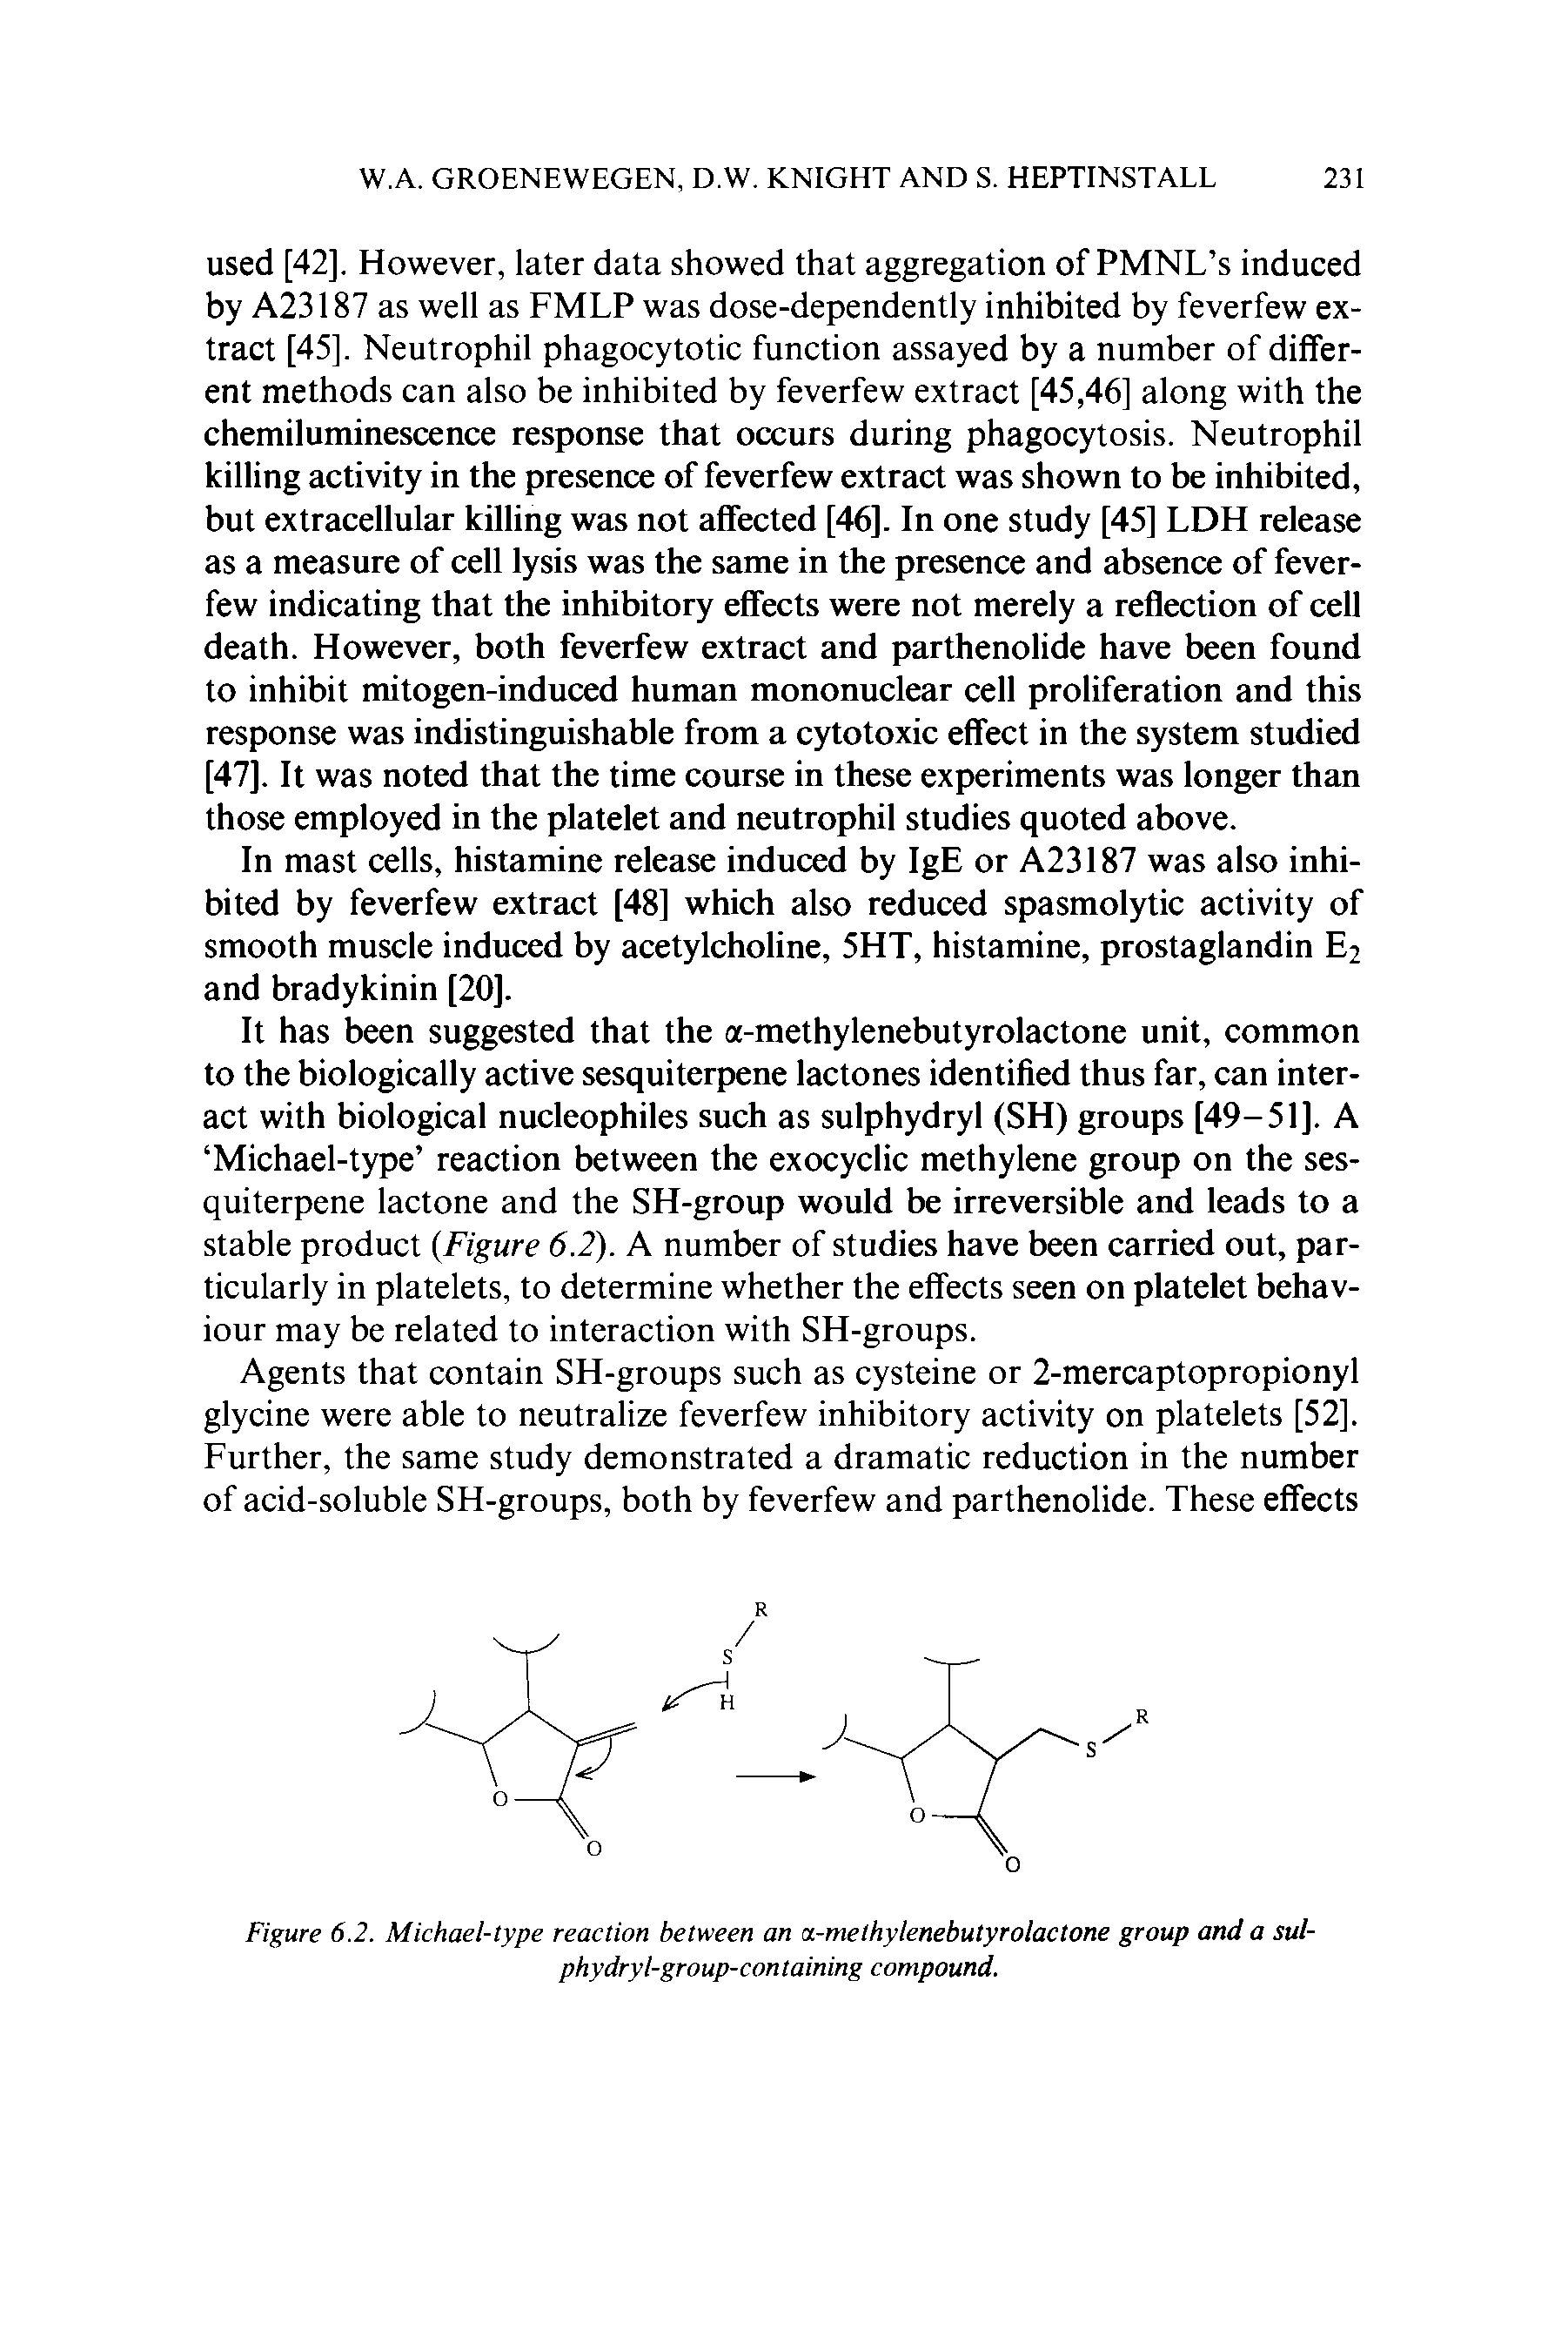 Figure 6.2. Michael-type reaction between an a-methylenebutyrolactone group and a sul-phydryl-group-containing compound.